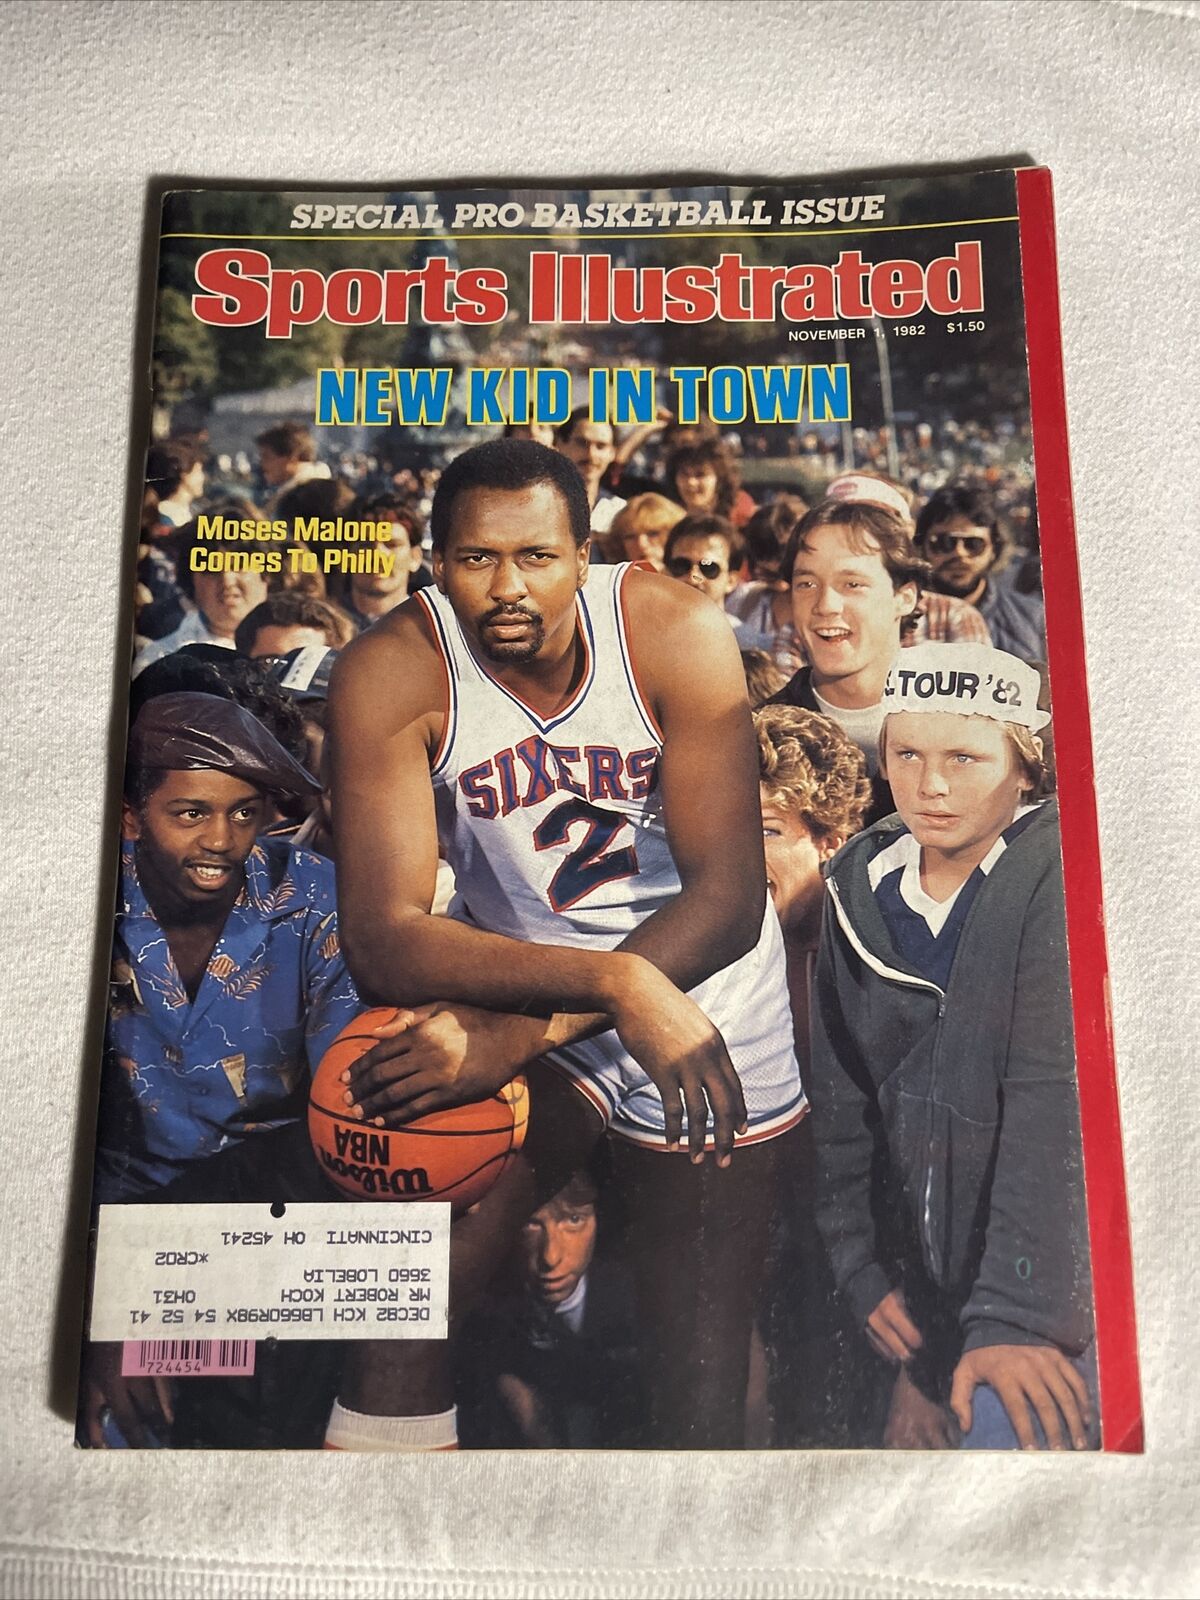 1982 November 1  Sports Illustrated Magazine, New kid in town  (CP246)